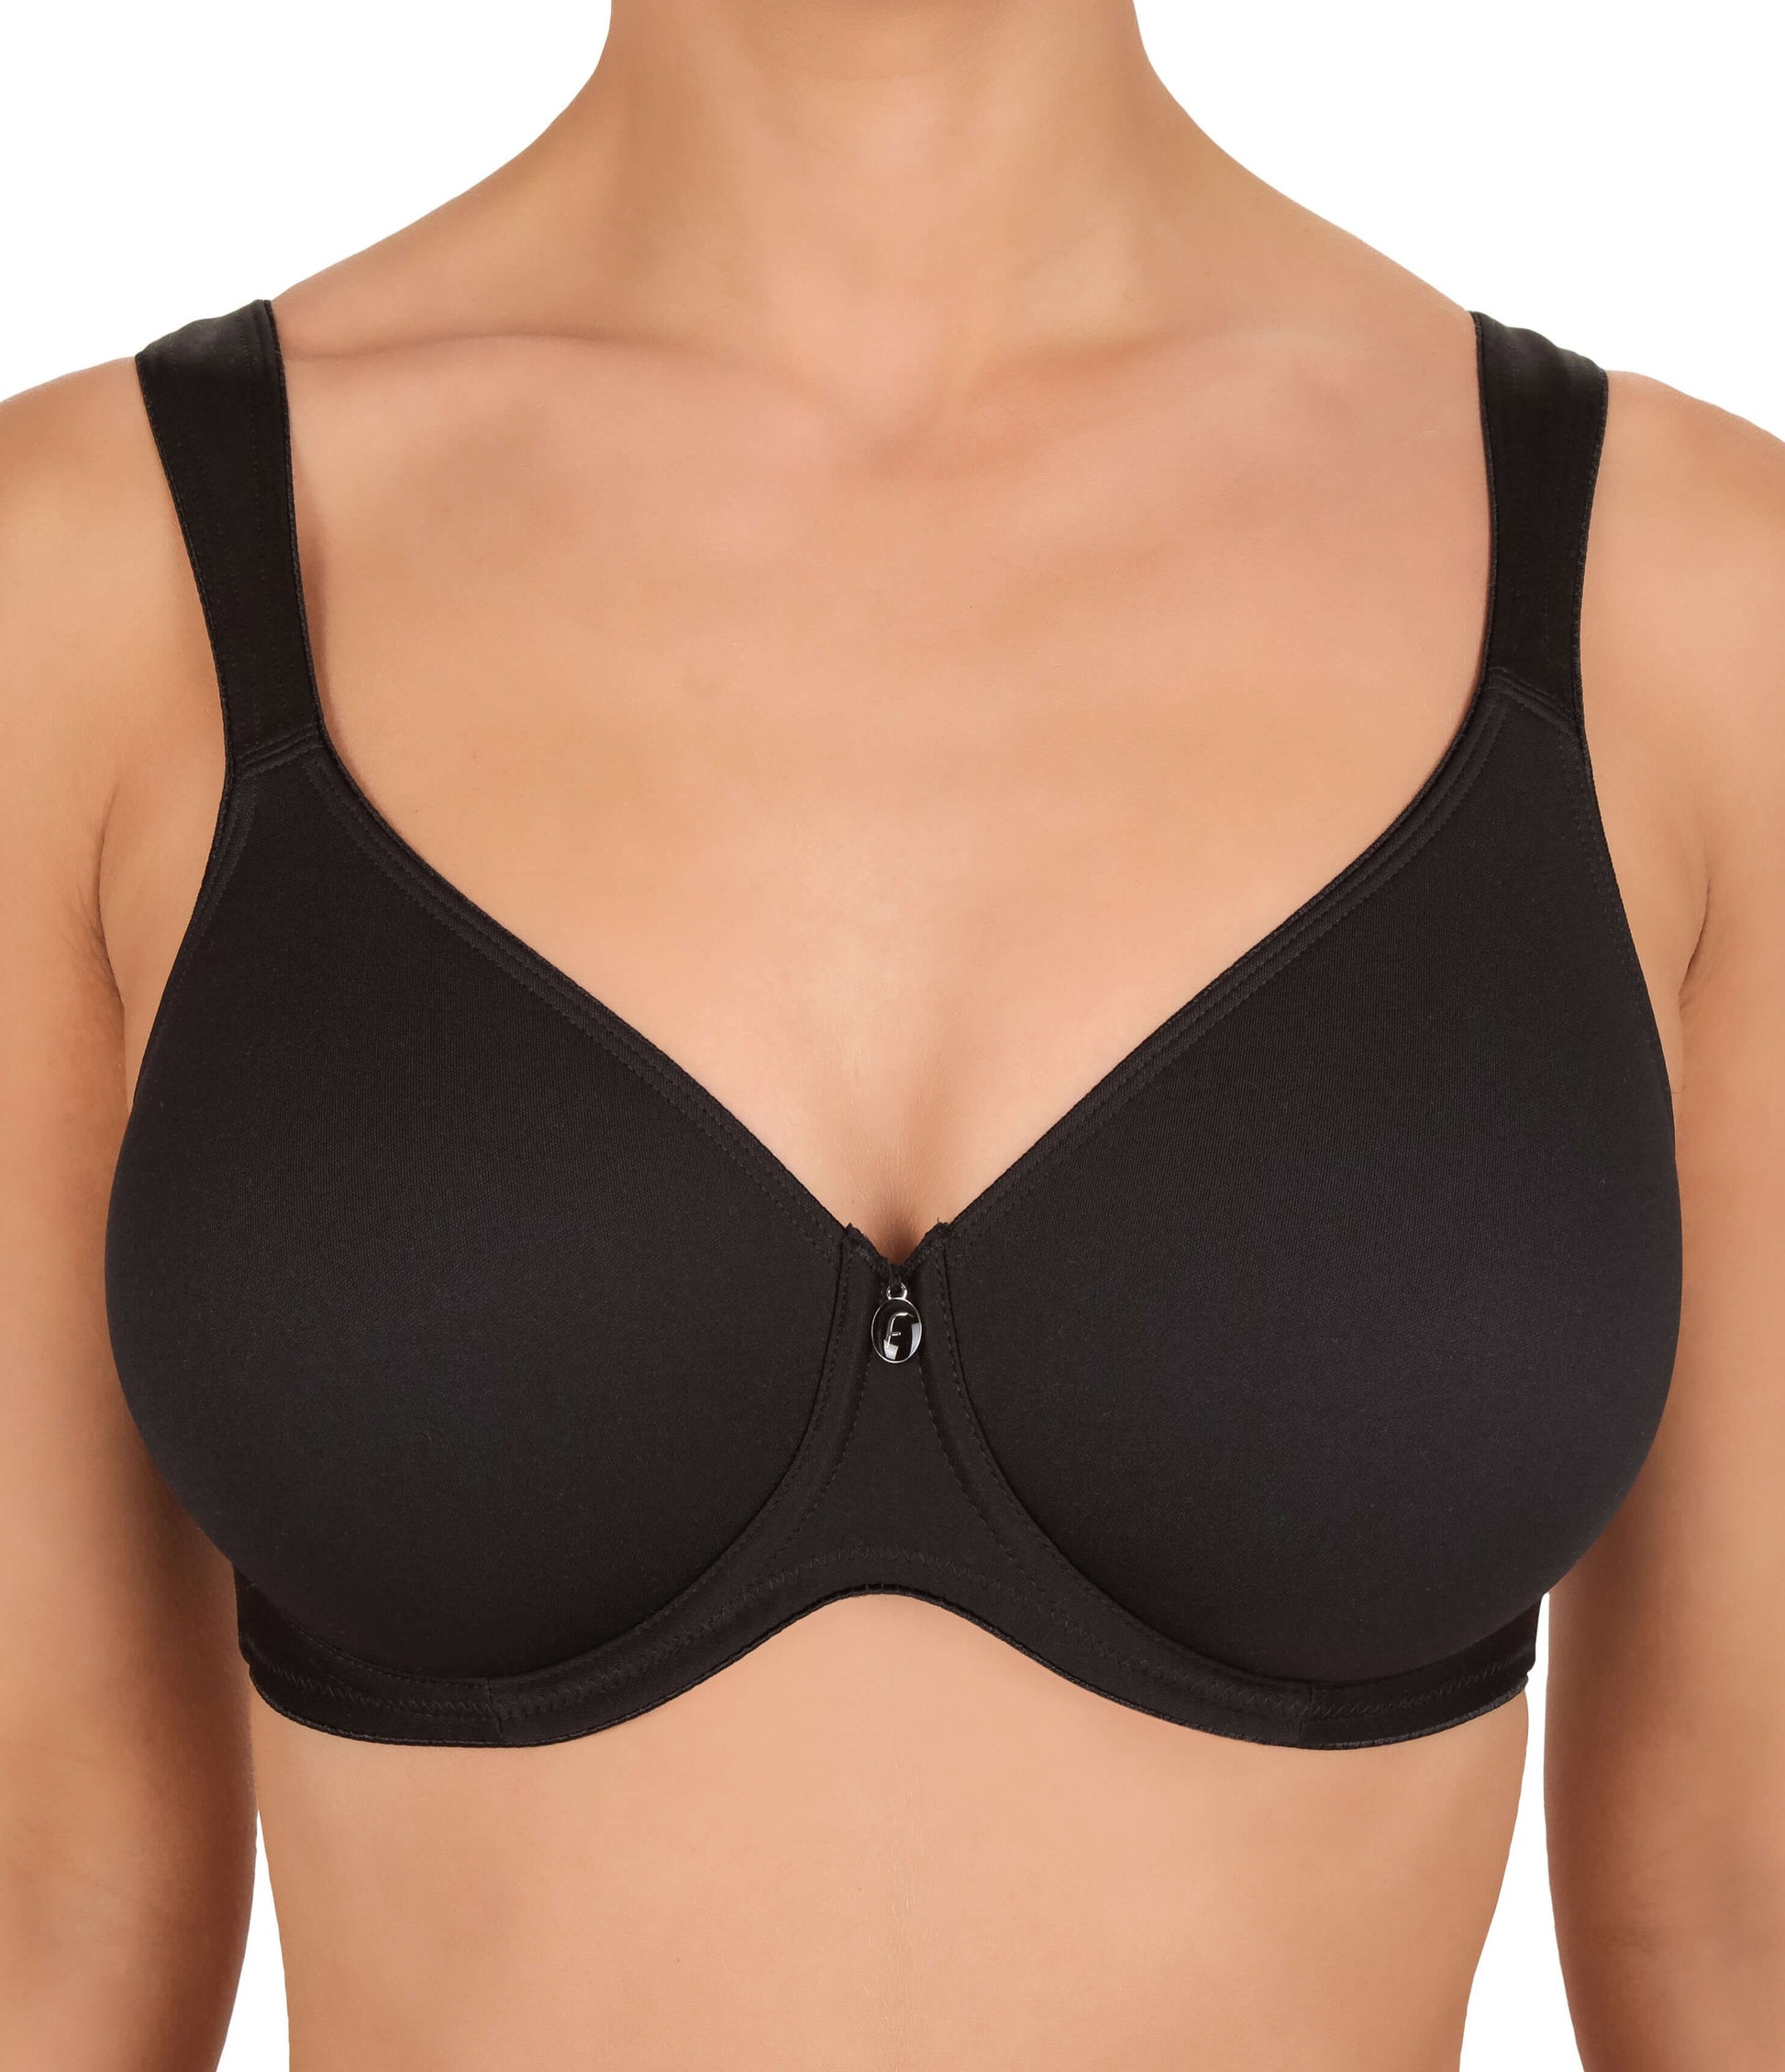 Pure Balance Underwire Spacer Bra - Black worn by model front view